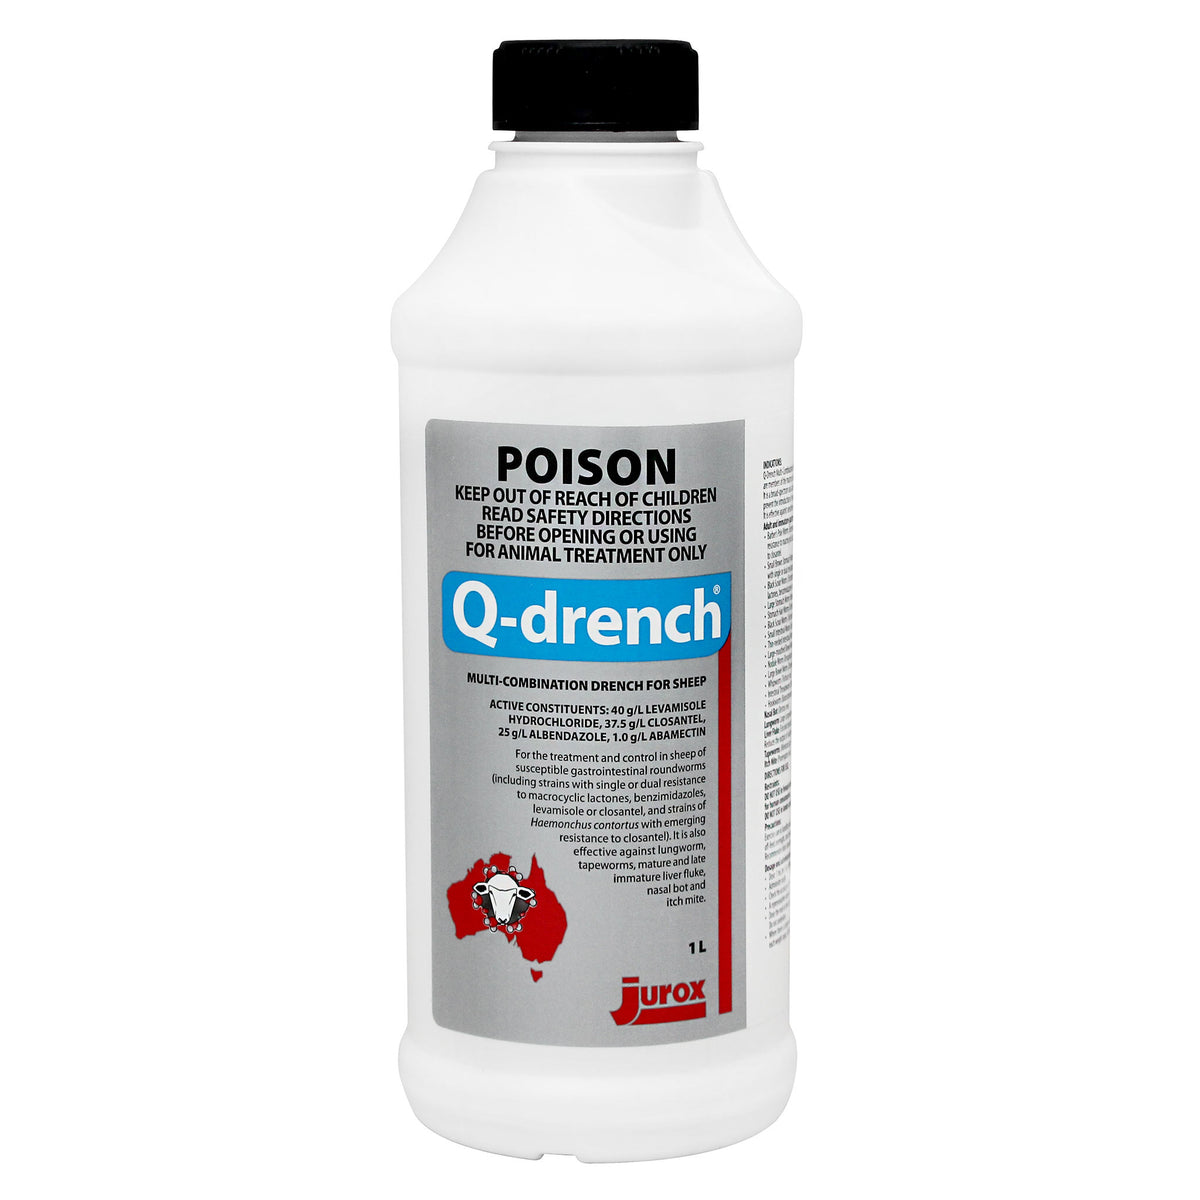 Q-drench Multi-Combination Drench for Sheep